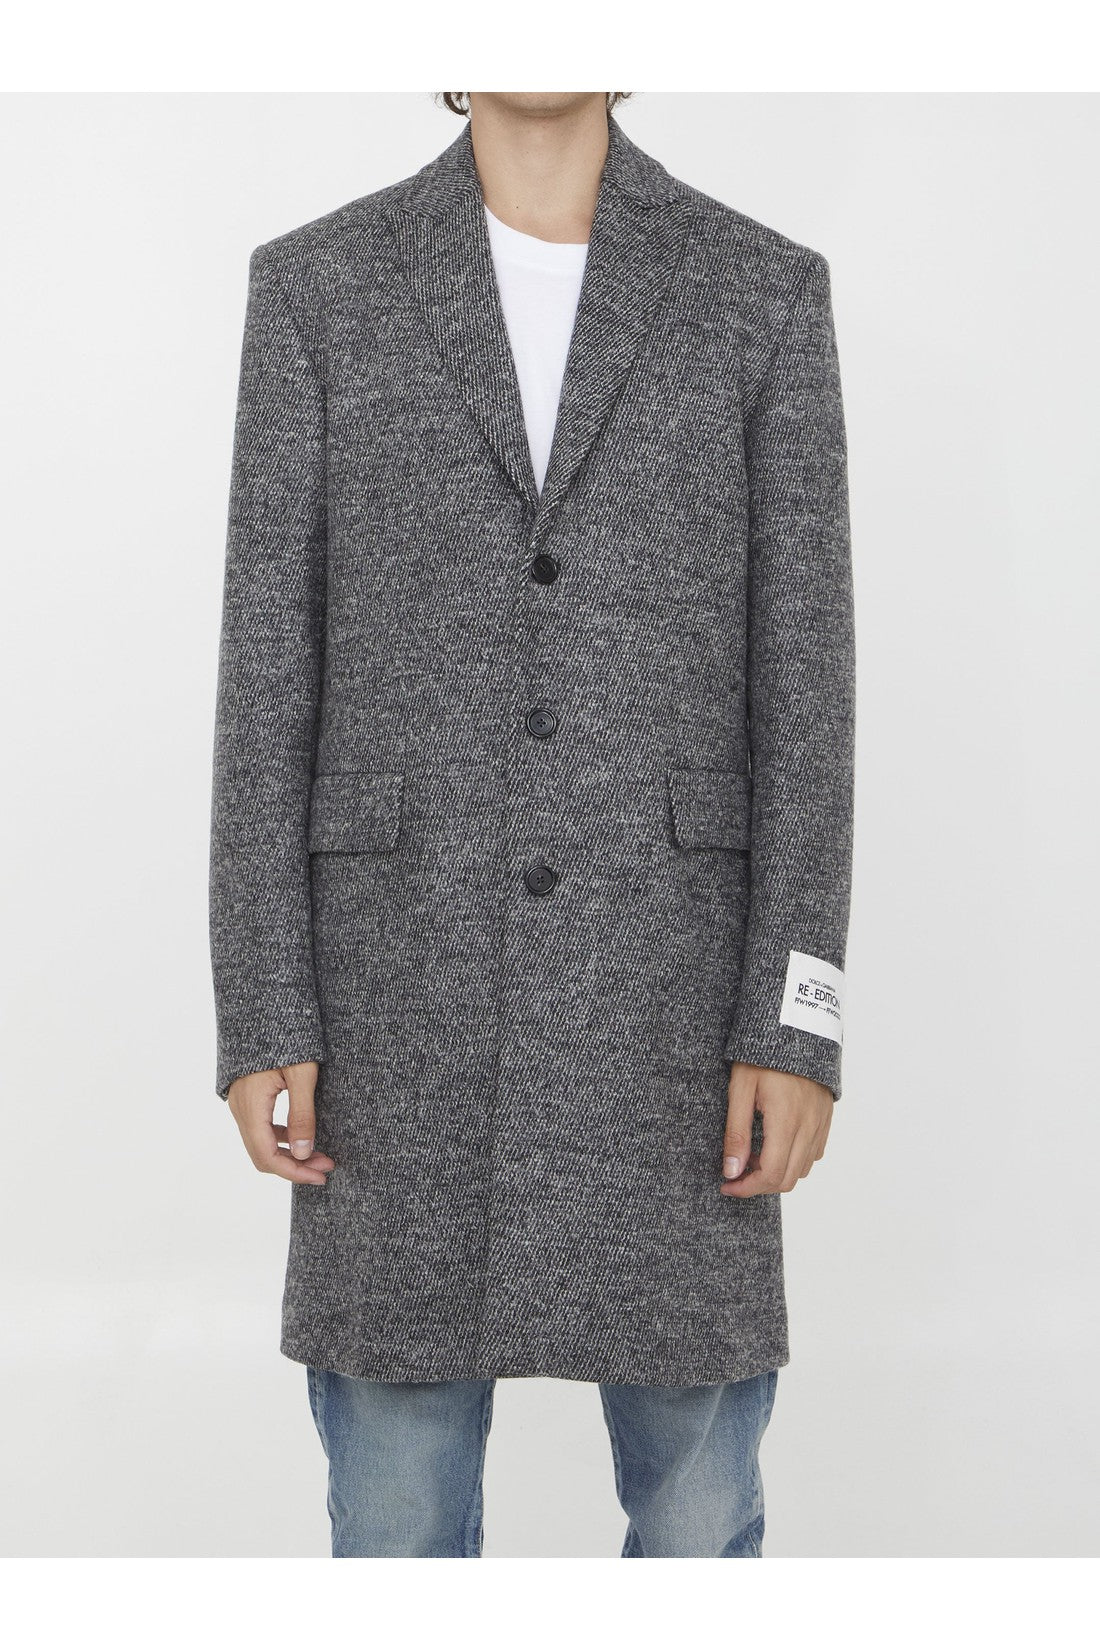 Re-Edition wool coat